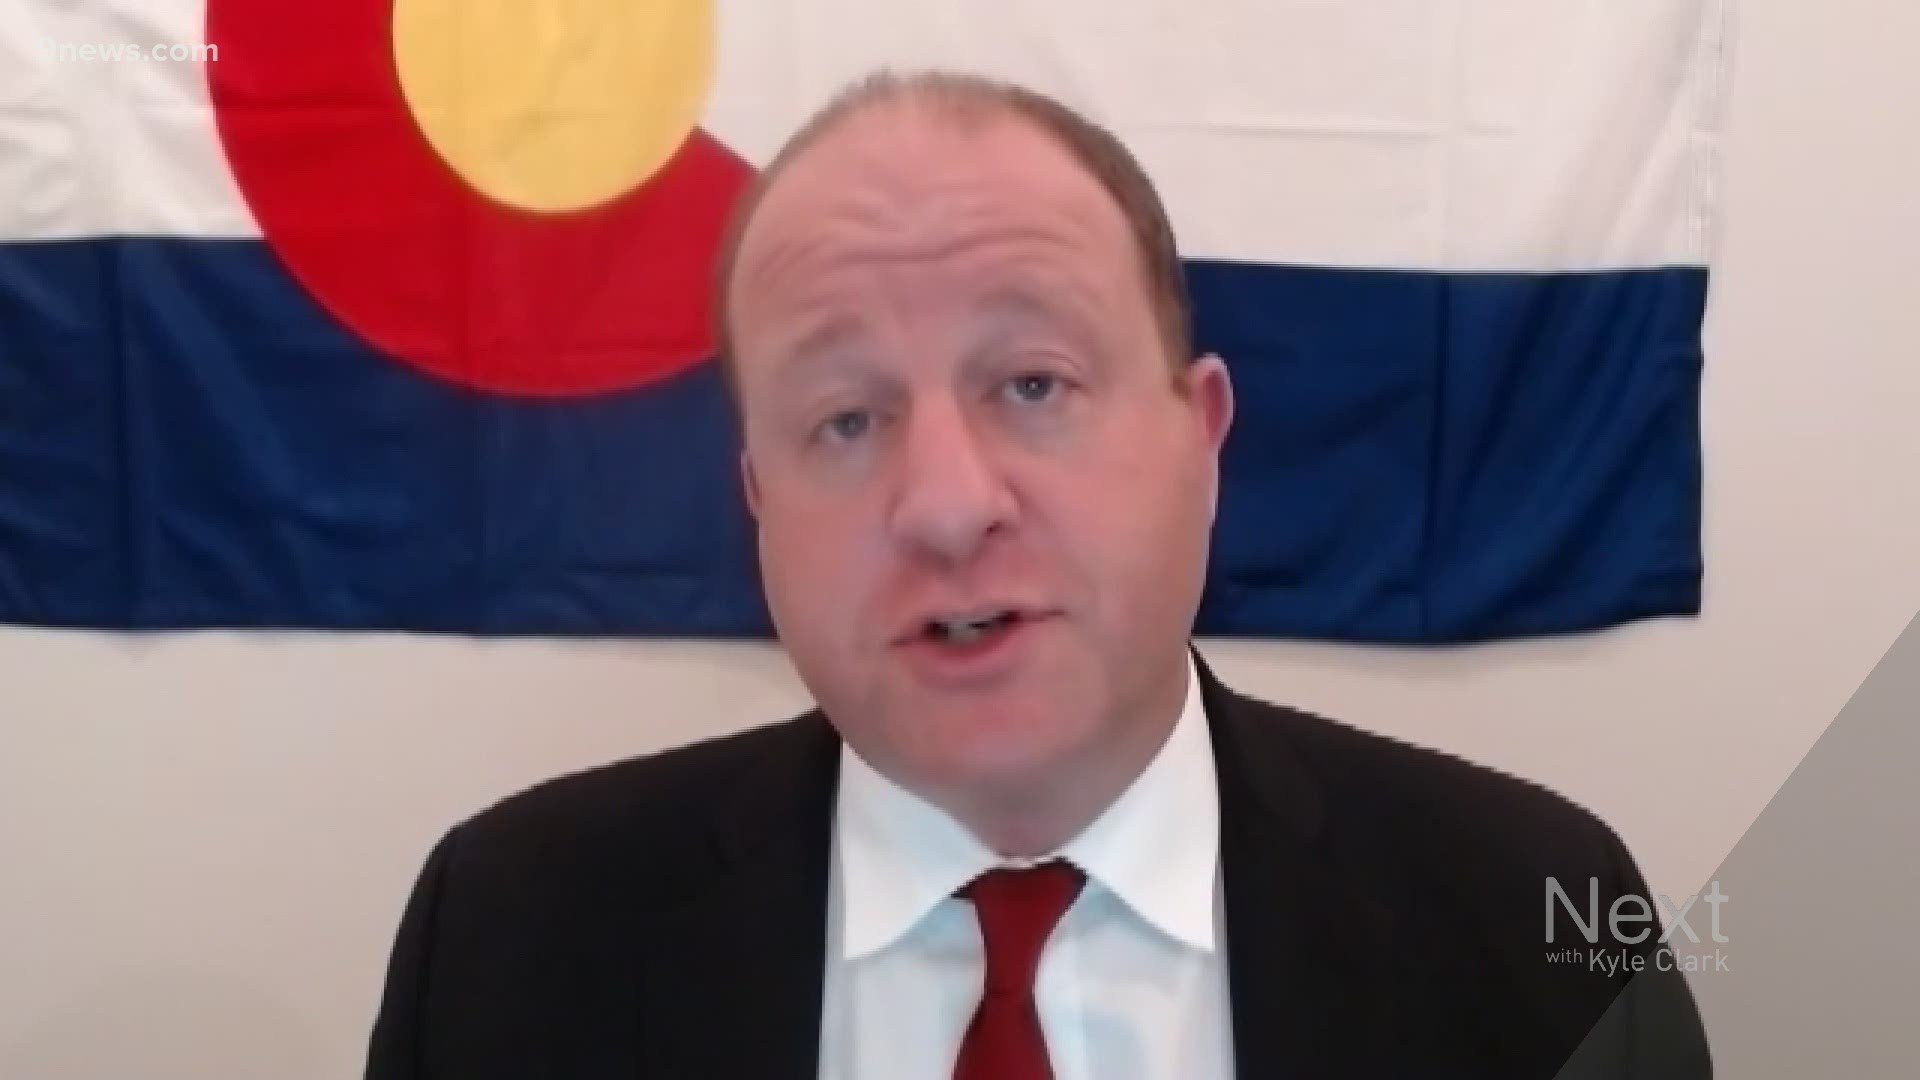 Political reporter Marshall Zelinger caught up with Colorado Gov. Jared Polis to discuss coronavirus and more. Here's a clip of their interview.